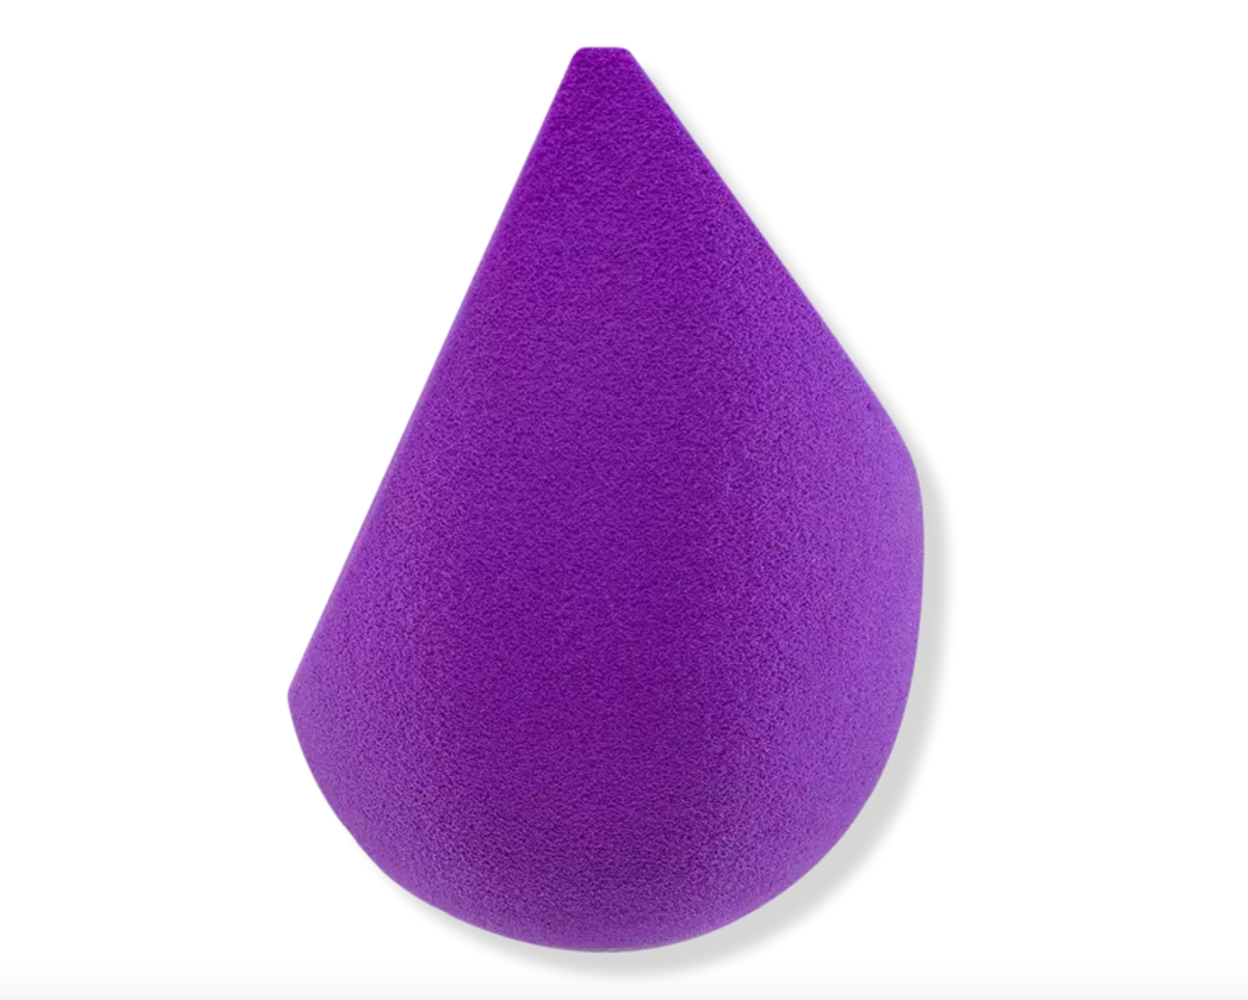 Cheap Beauty Blender dupes, by beauty blogger What The Fab